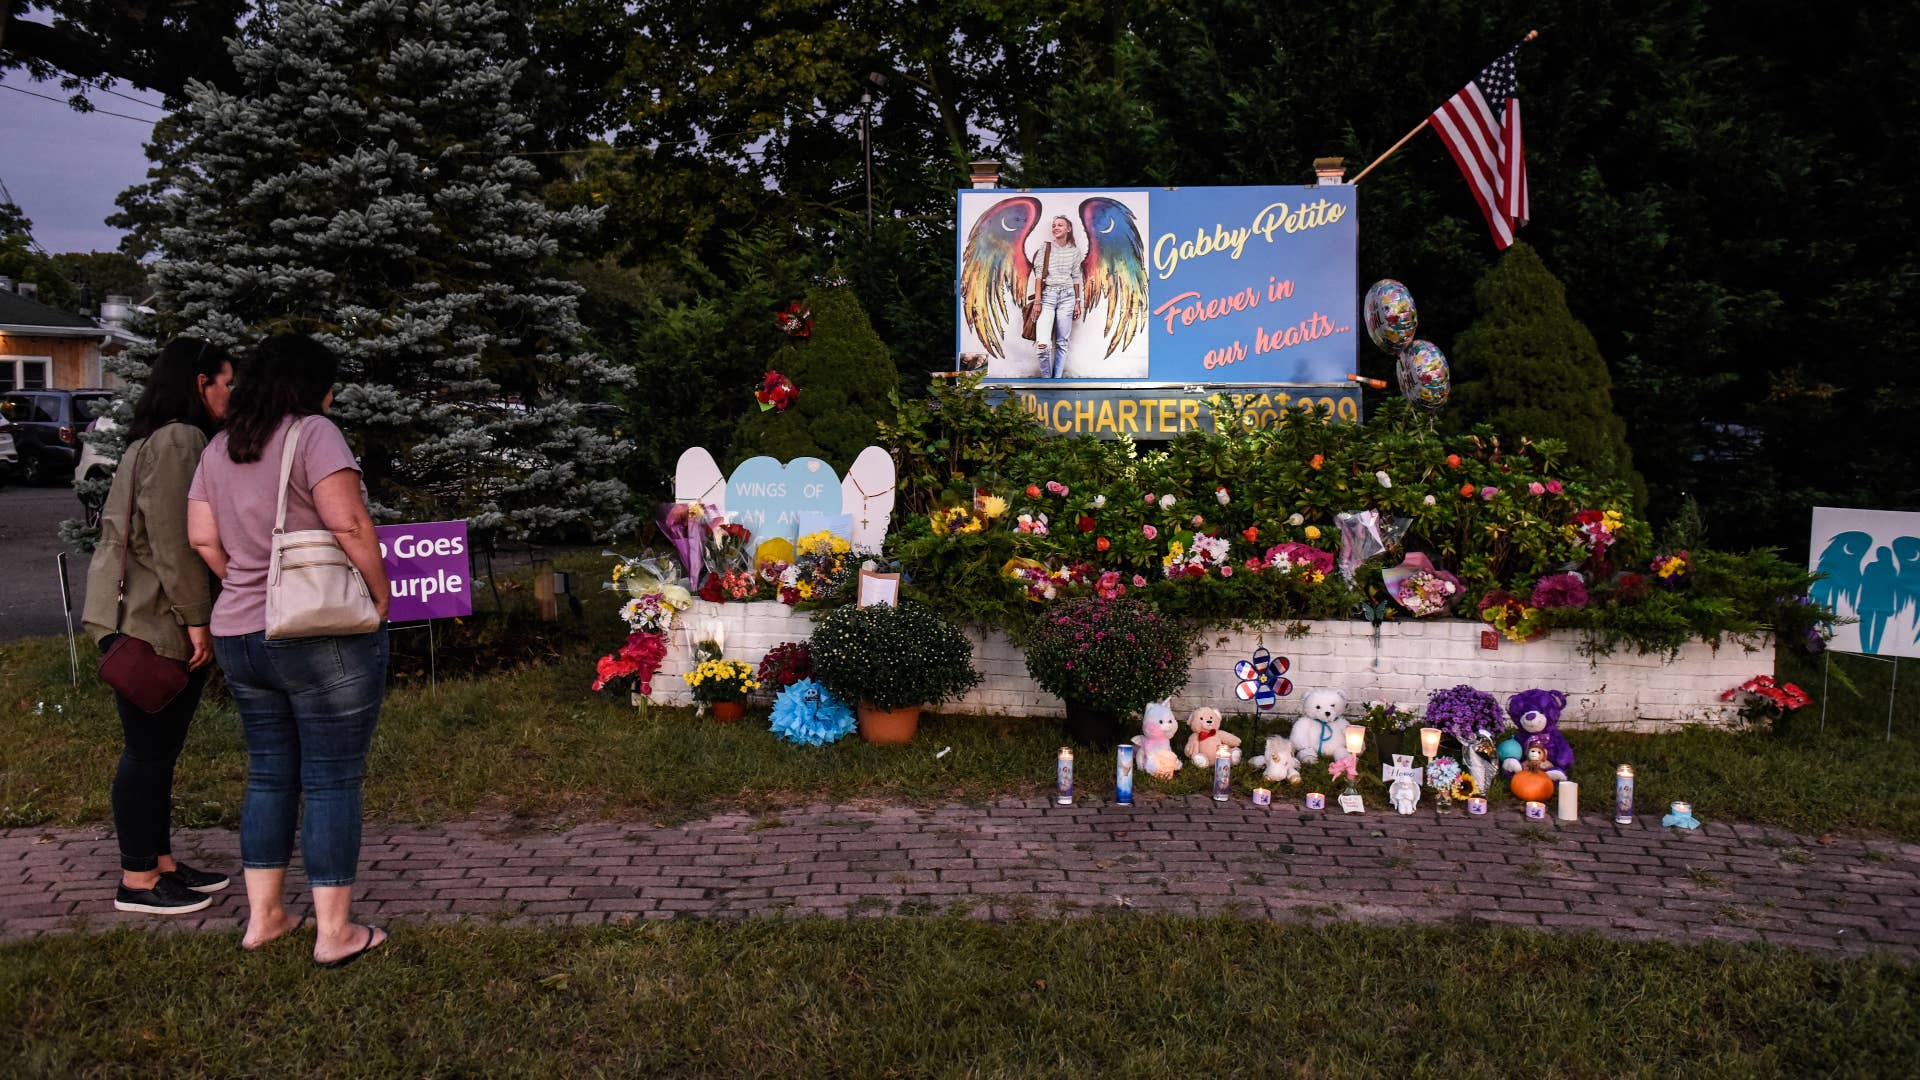 A memorial for Gabby Petito is pictured